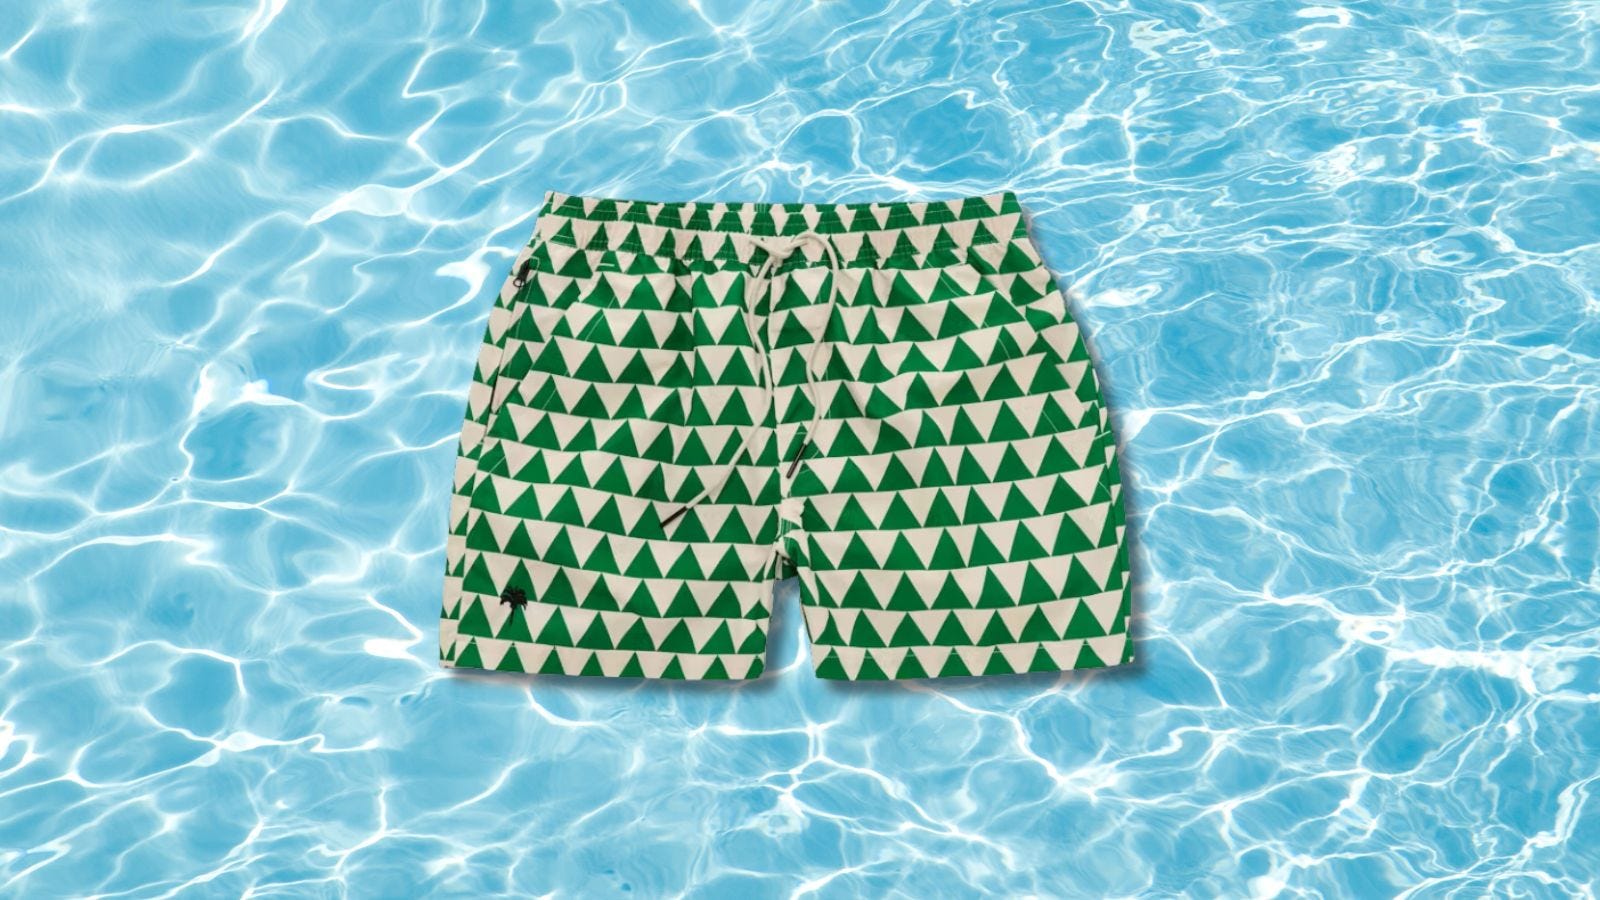 image of green and white men's swim trunks set against a pool water background